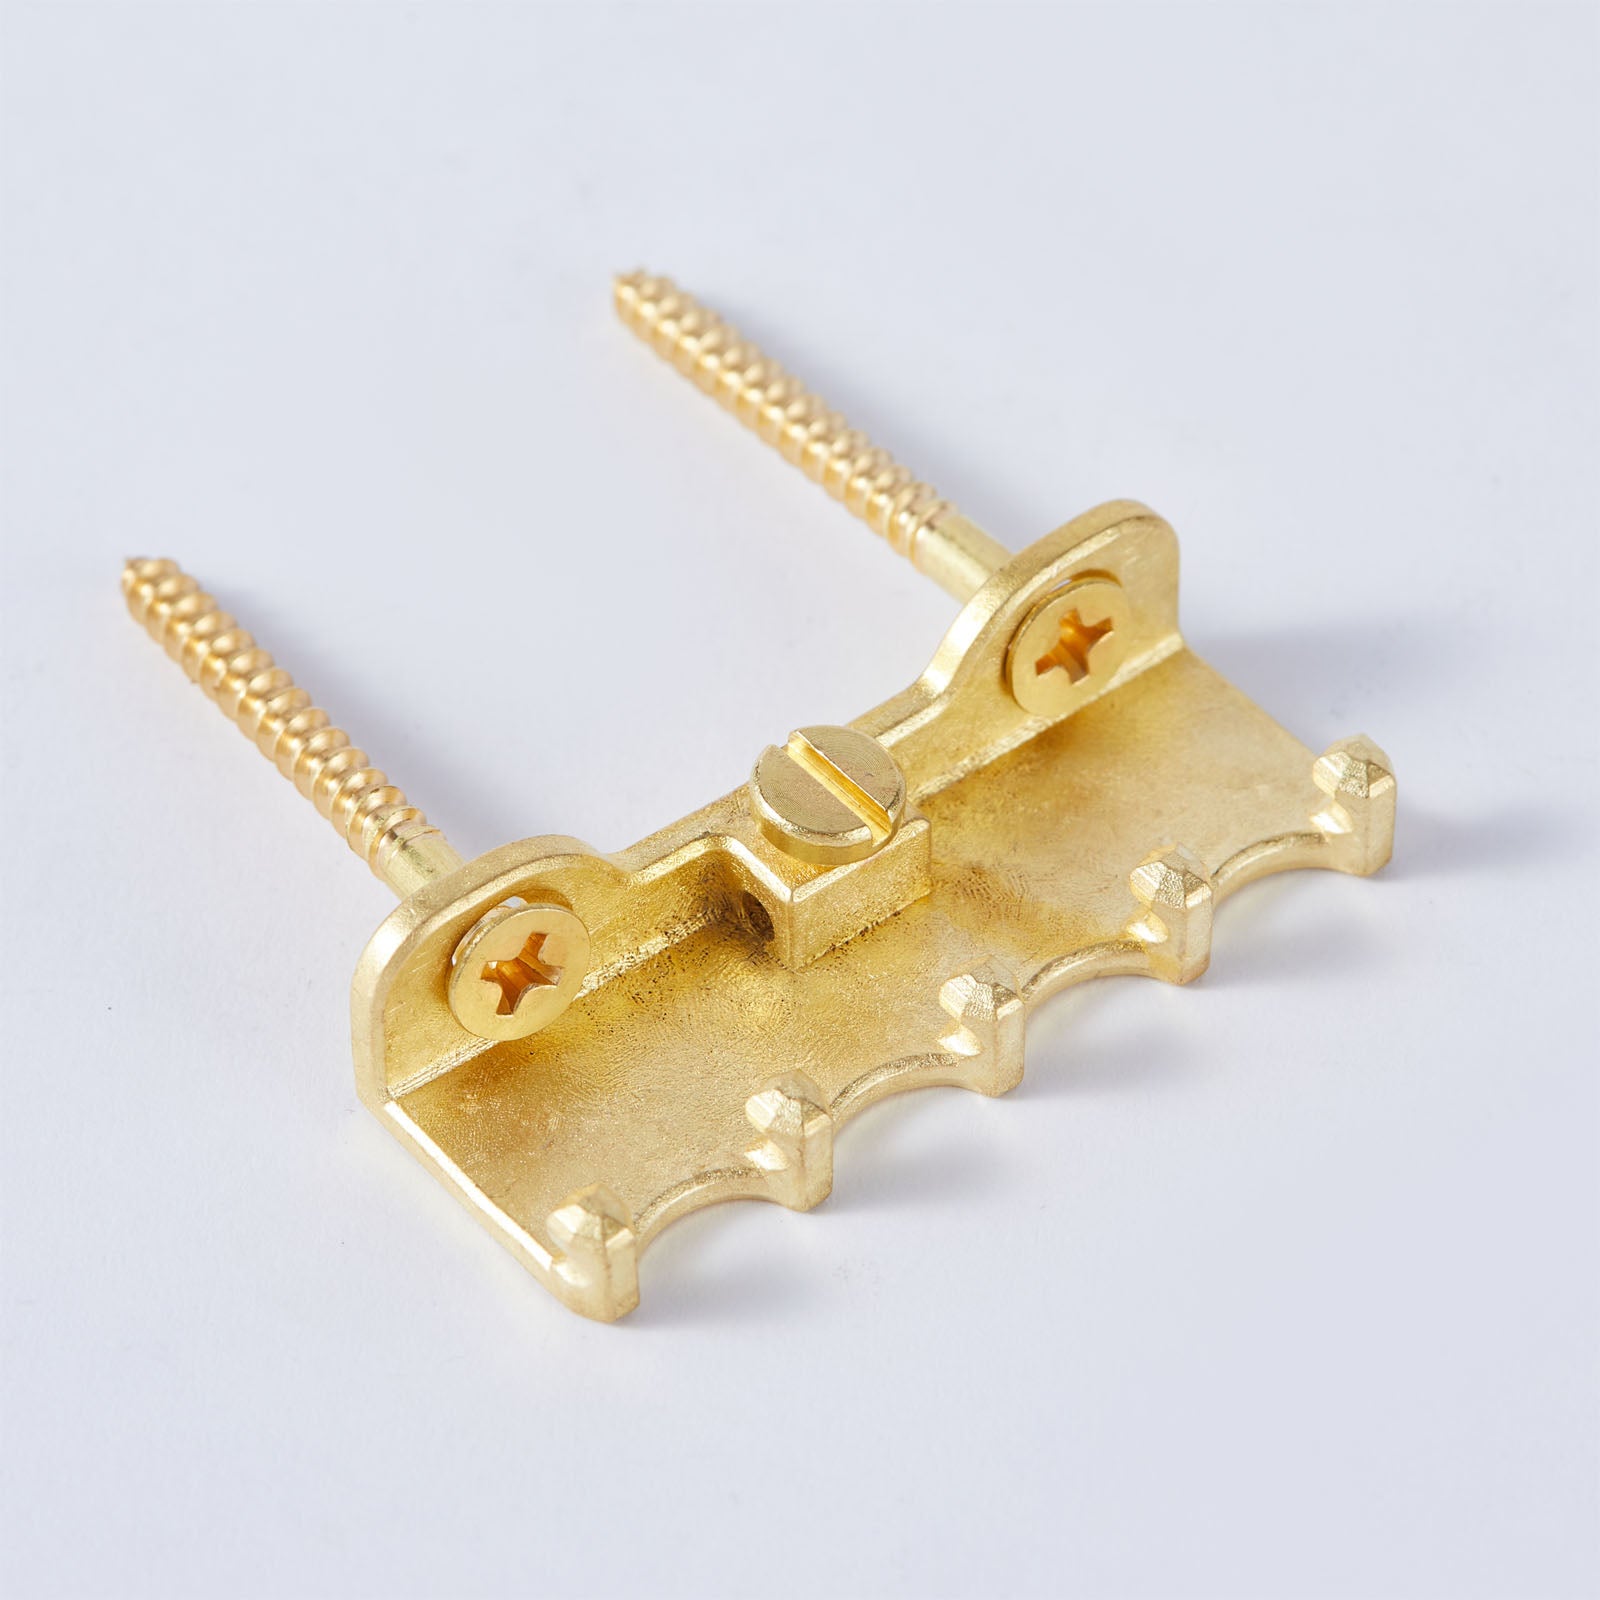 Electric Guitar Tremolo Bridge Spring Claw Full Solid Brass Hook With Screw